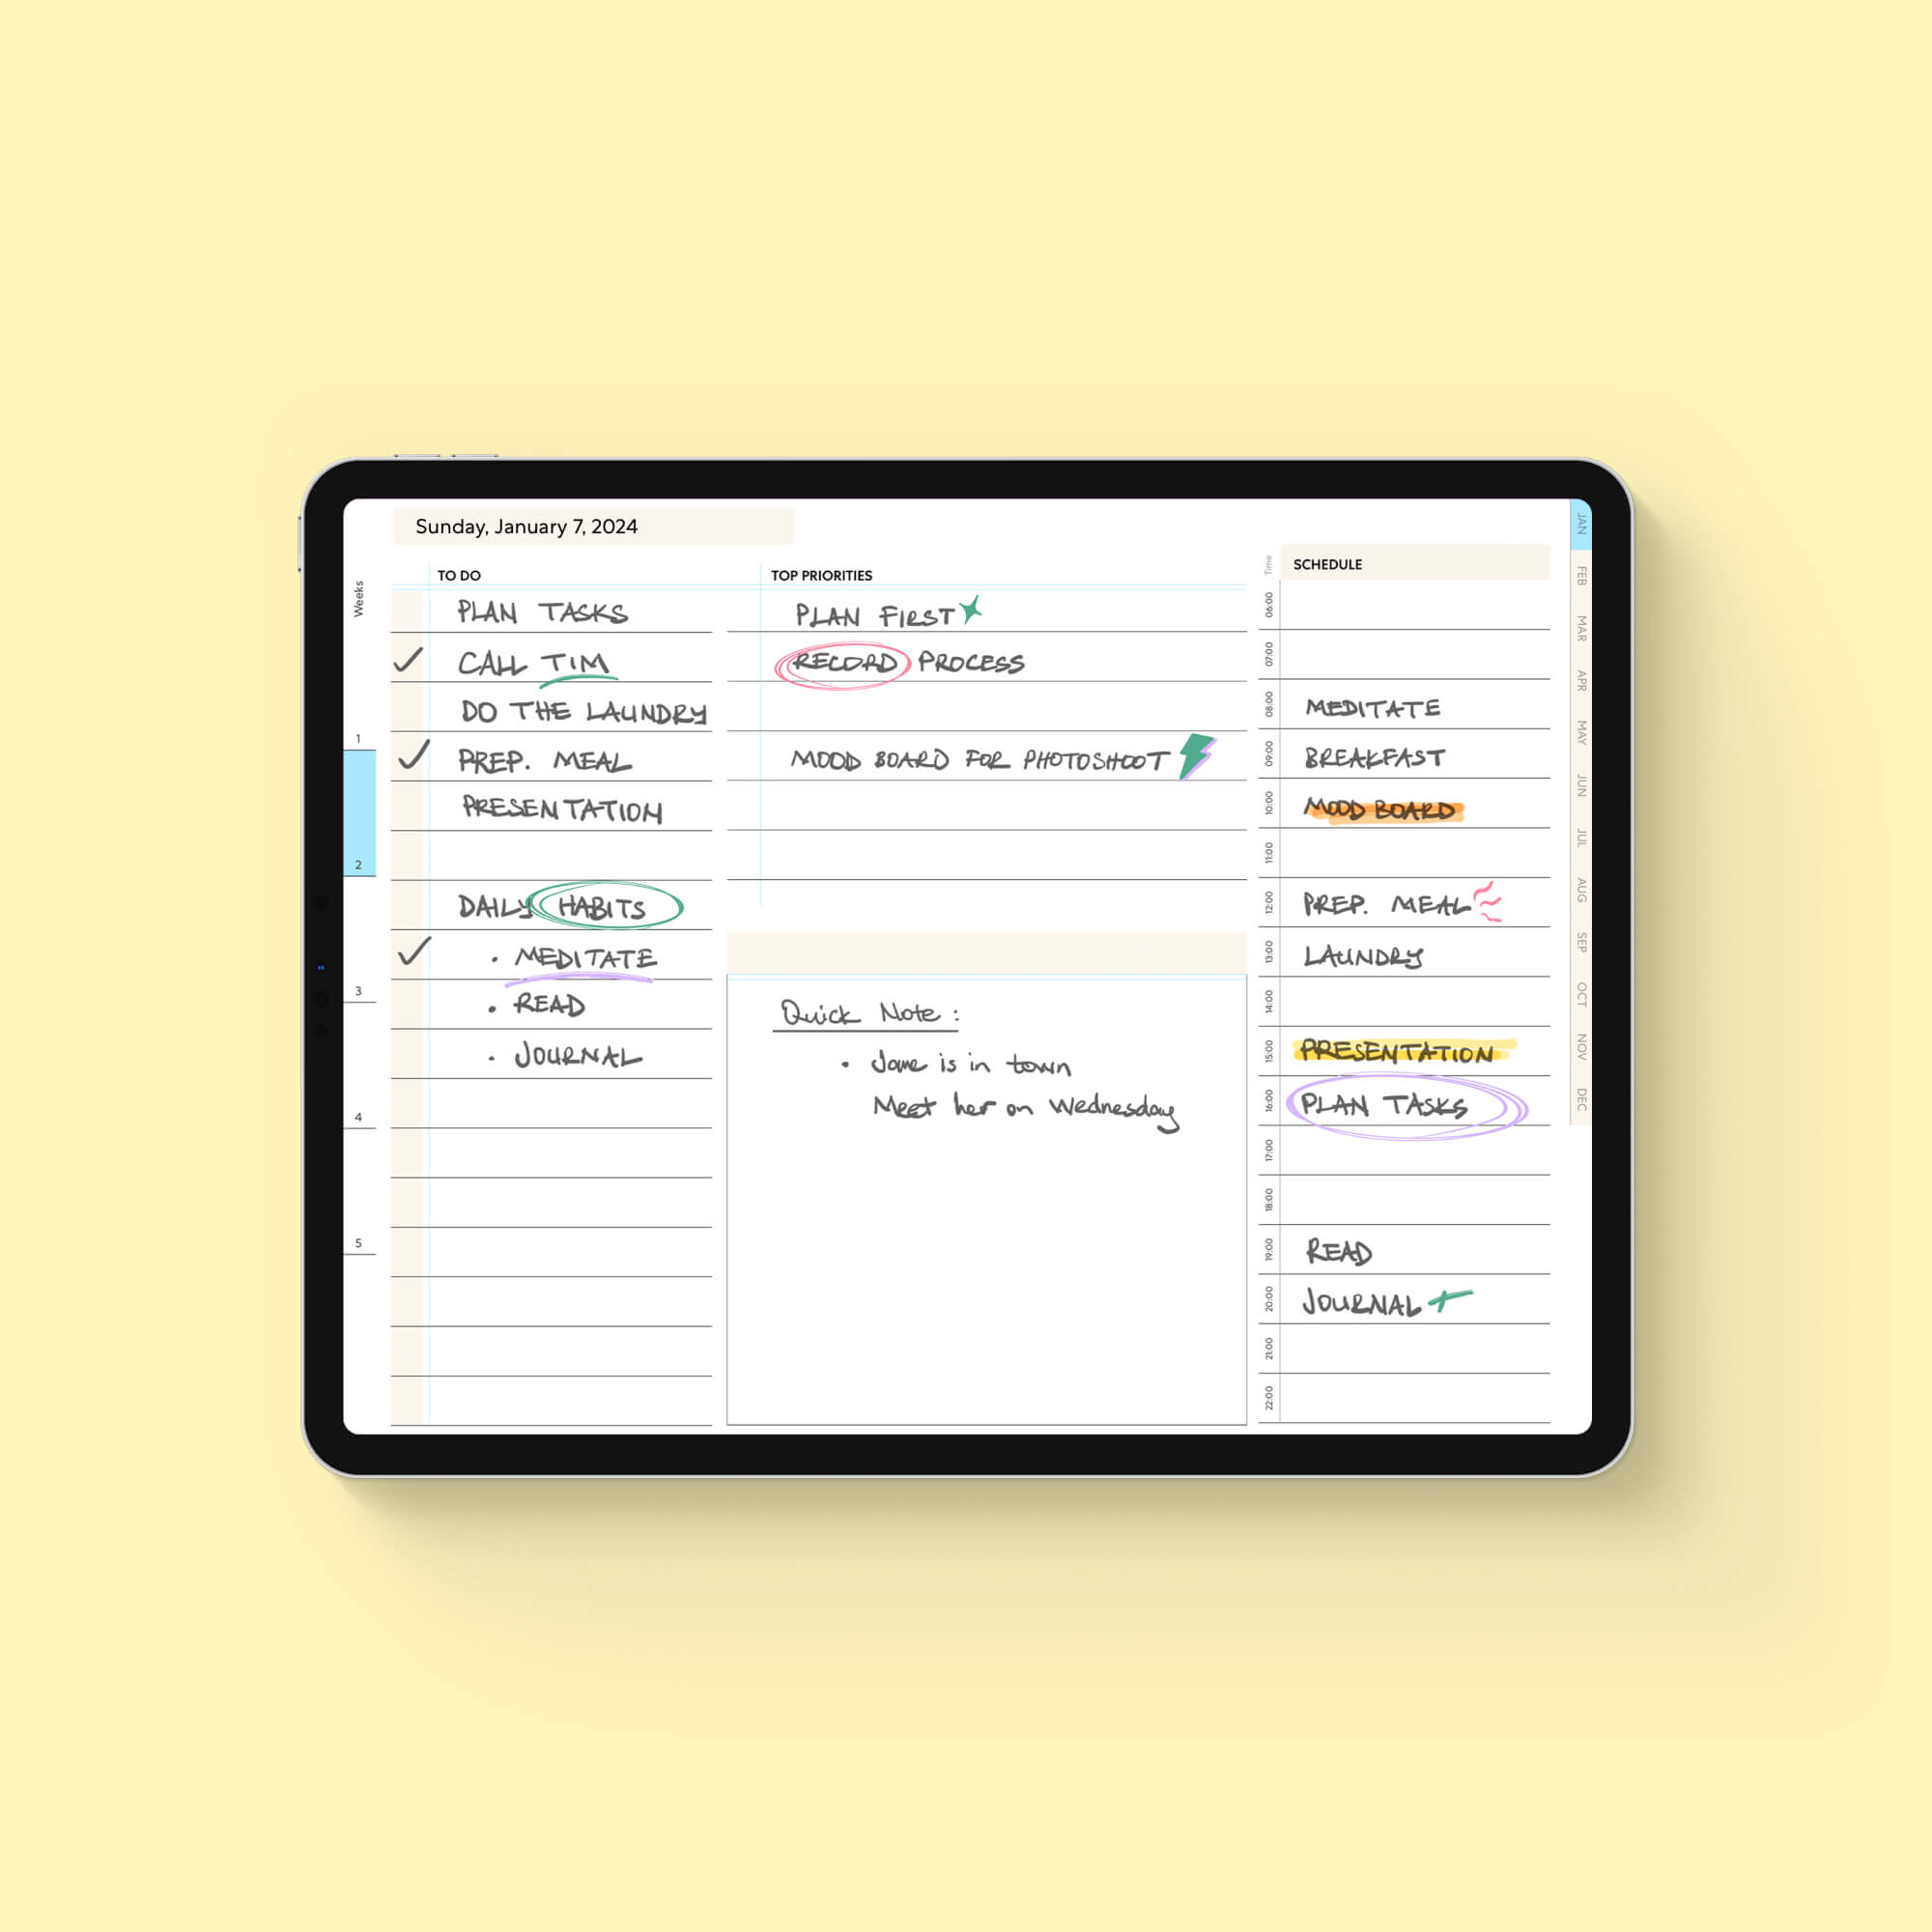 iPad with light mode digital planner on display with focus on one day on a yellow background